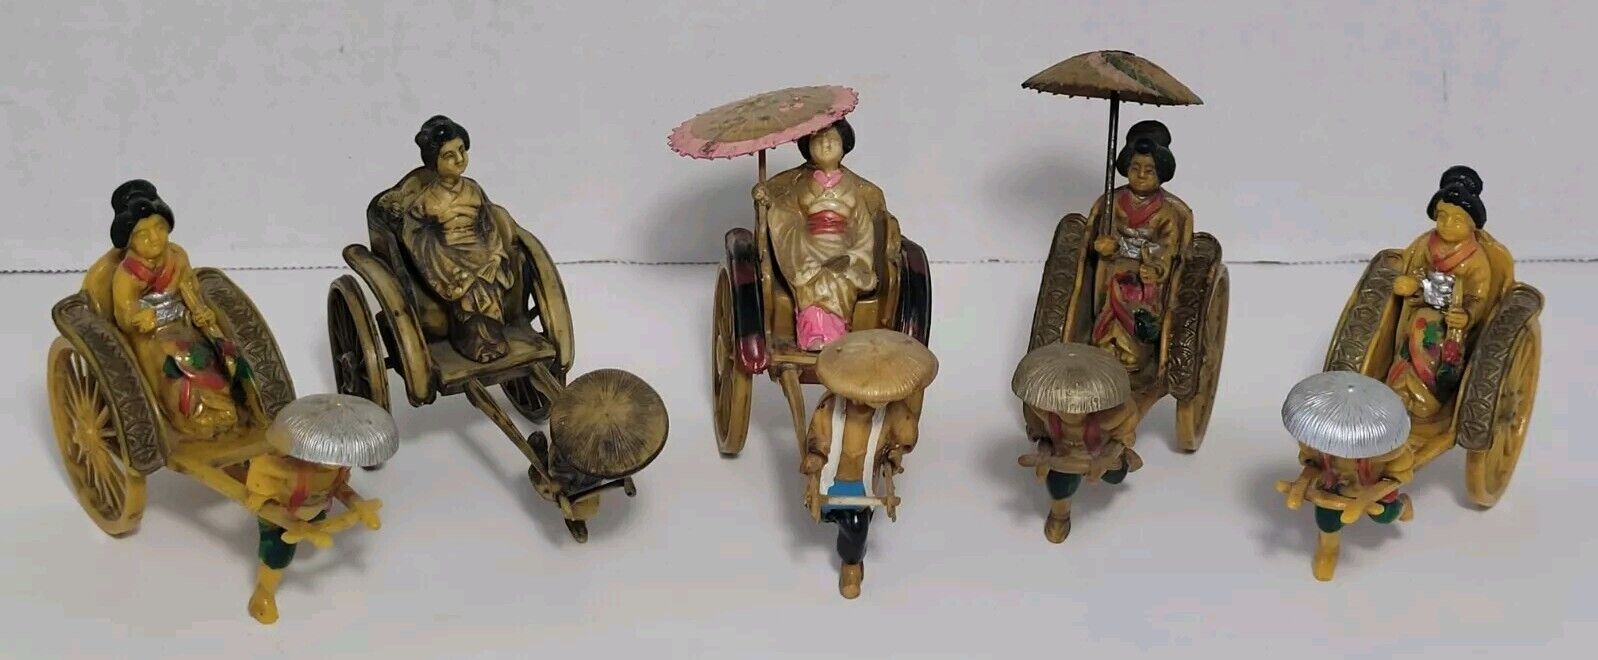 Lot Of 5 Vintage Celluloid Japanese Geisha Girl In Rickshaw Toys Collectible